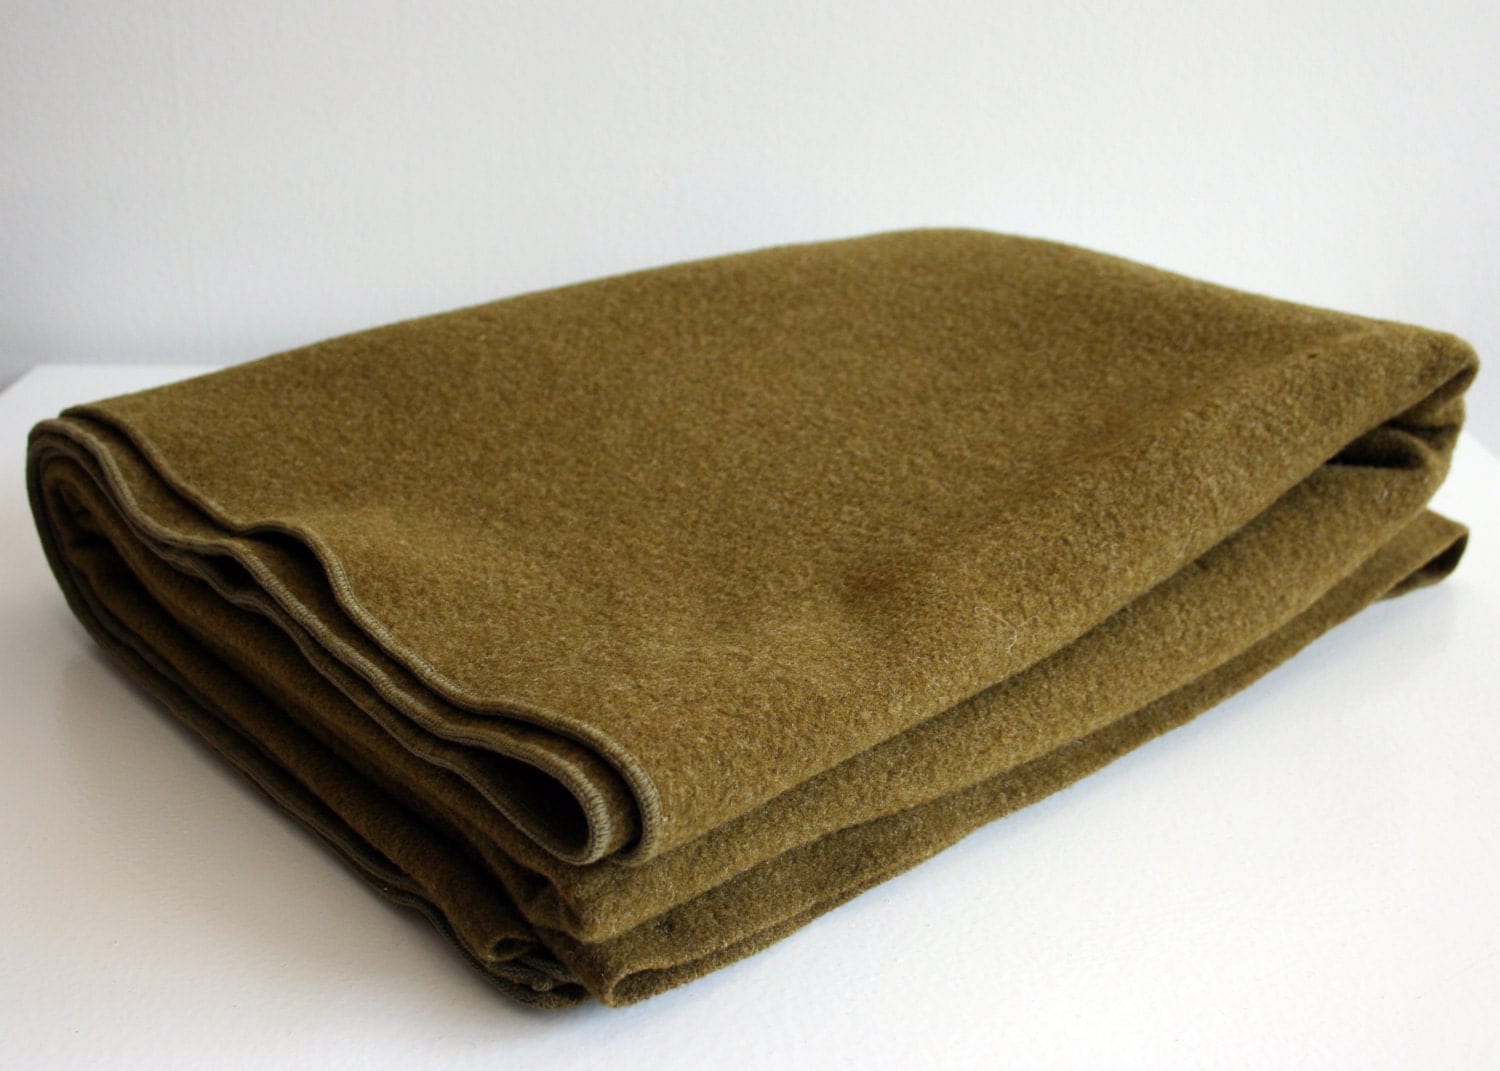 Concise and Clear: Discover the Versatility of Wool Army Blankets